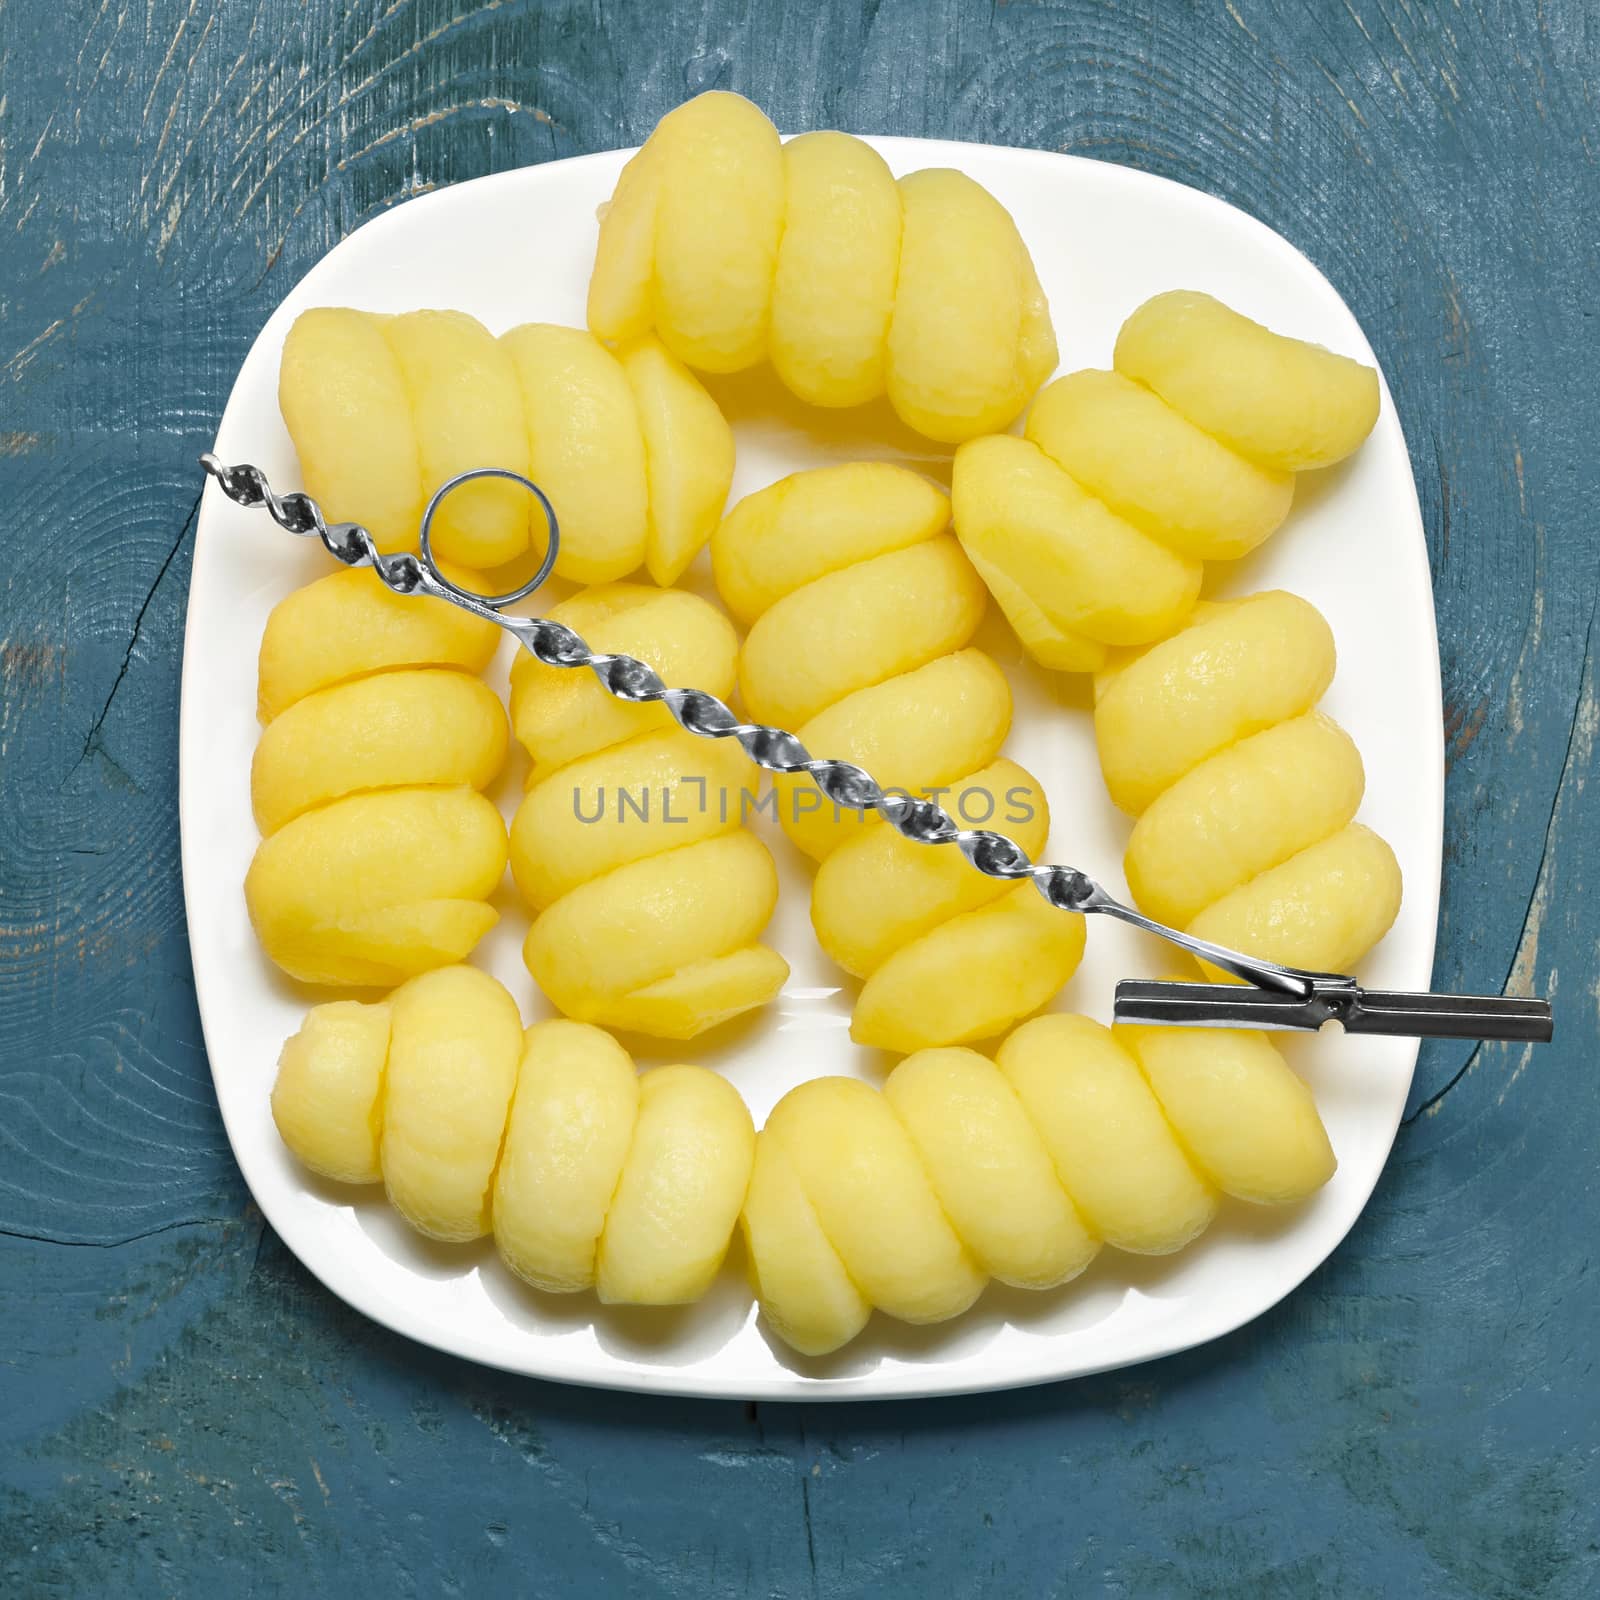 Raw potatoes, sliced, shaped, lies on a plate on blue wooden background, and tool for cutting